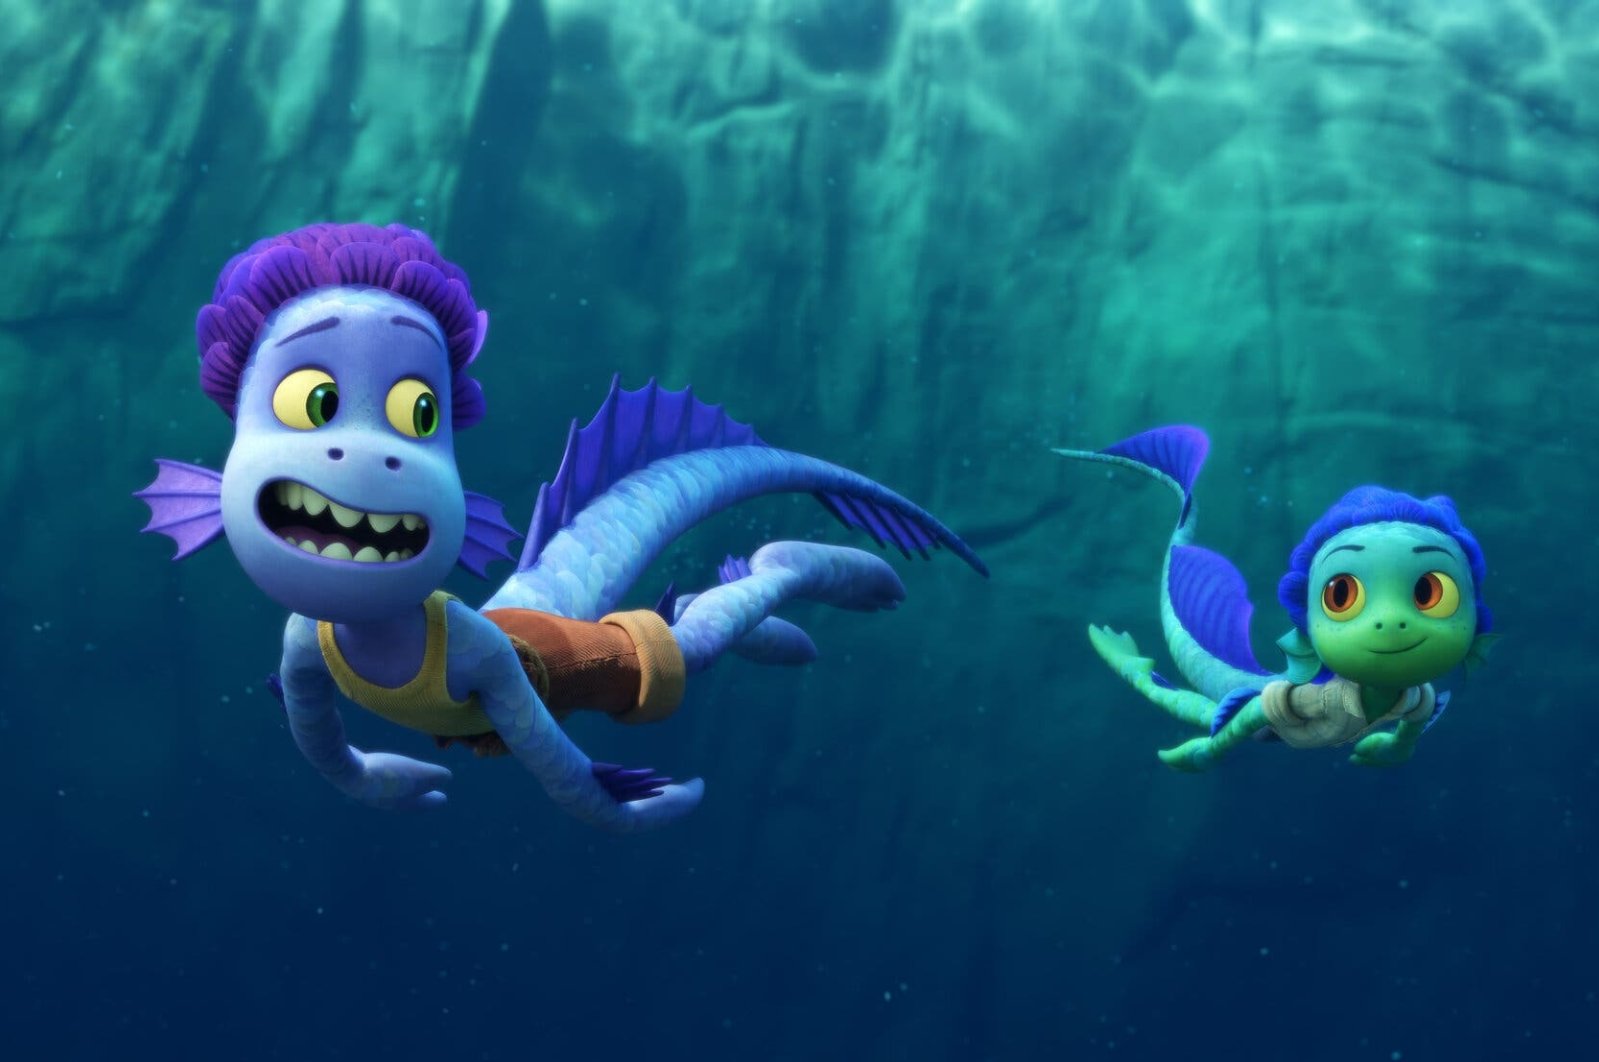 Alberto (L) and Luca are sea monsters who seek adventures on dry land in “Luca."